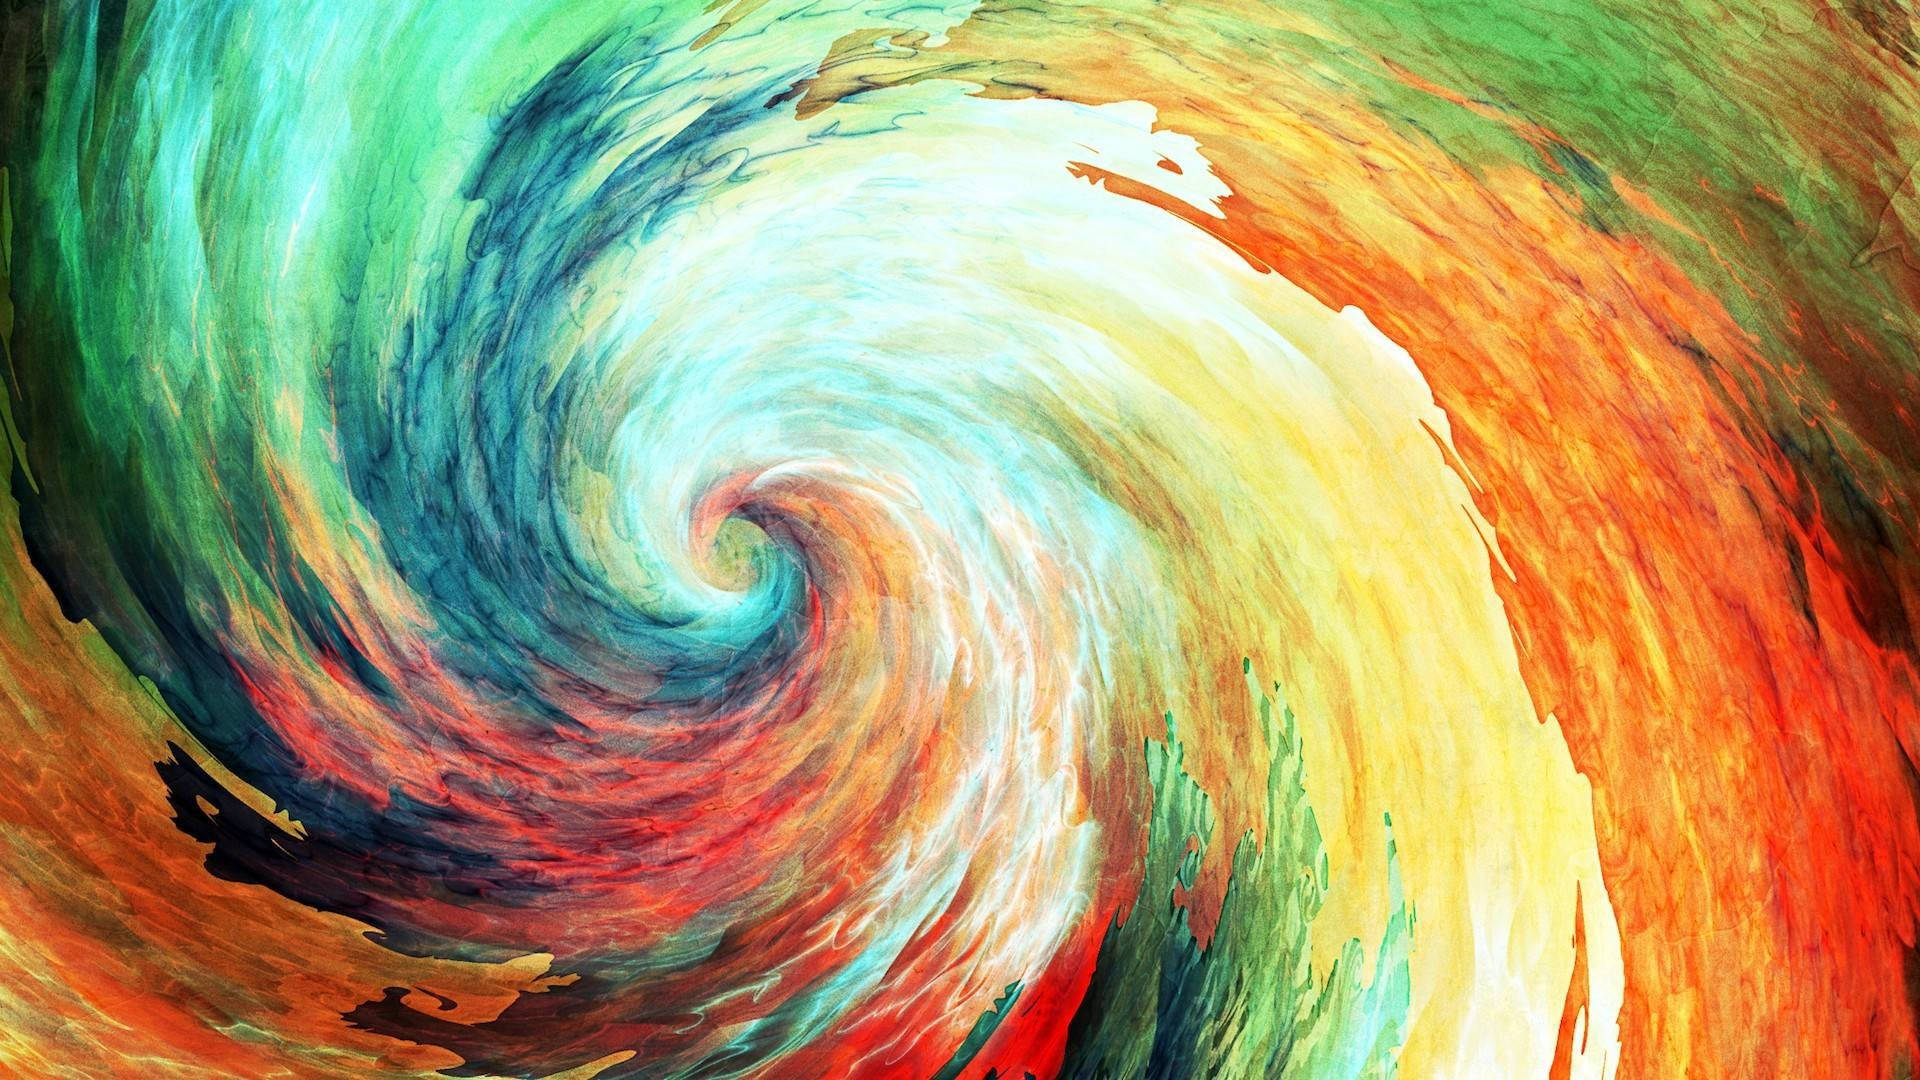 Abstract Swirls Of Color Animated Desktop